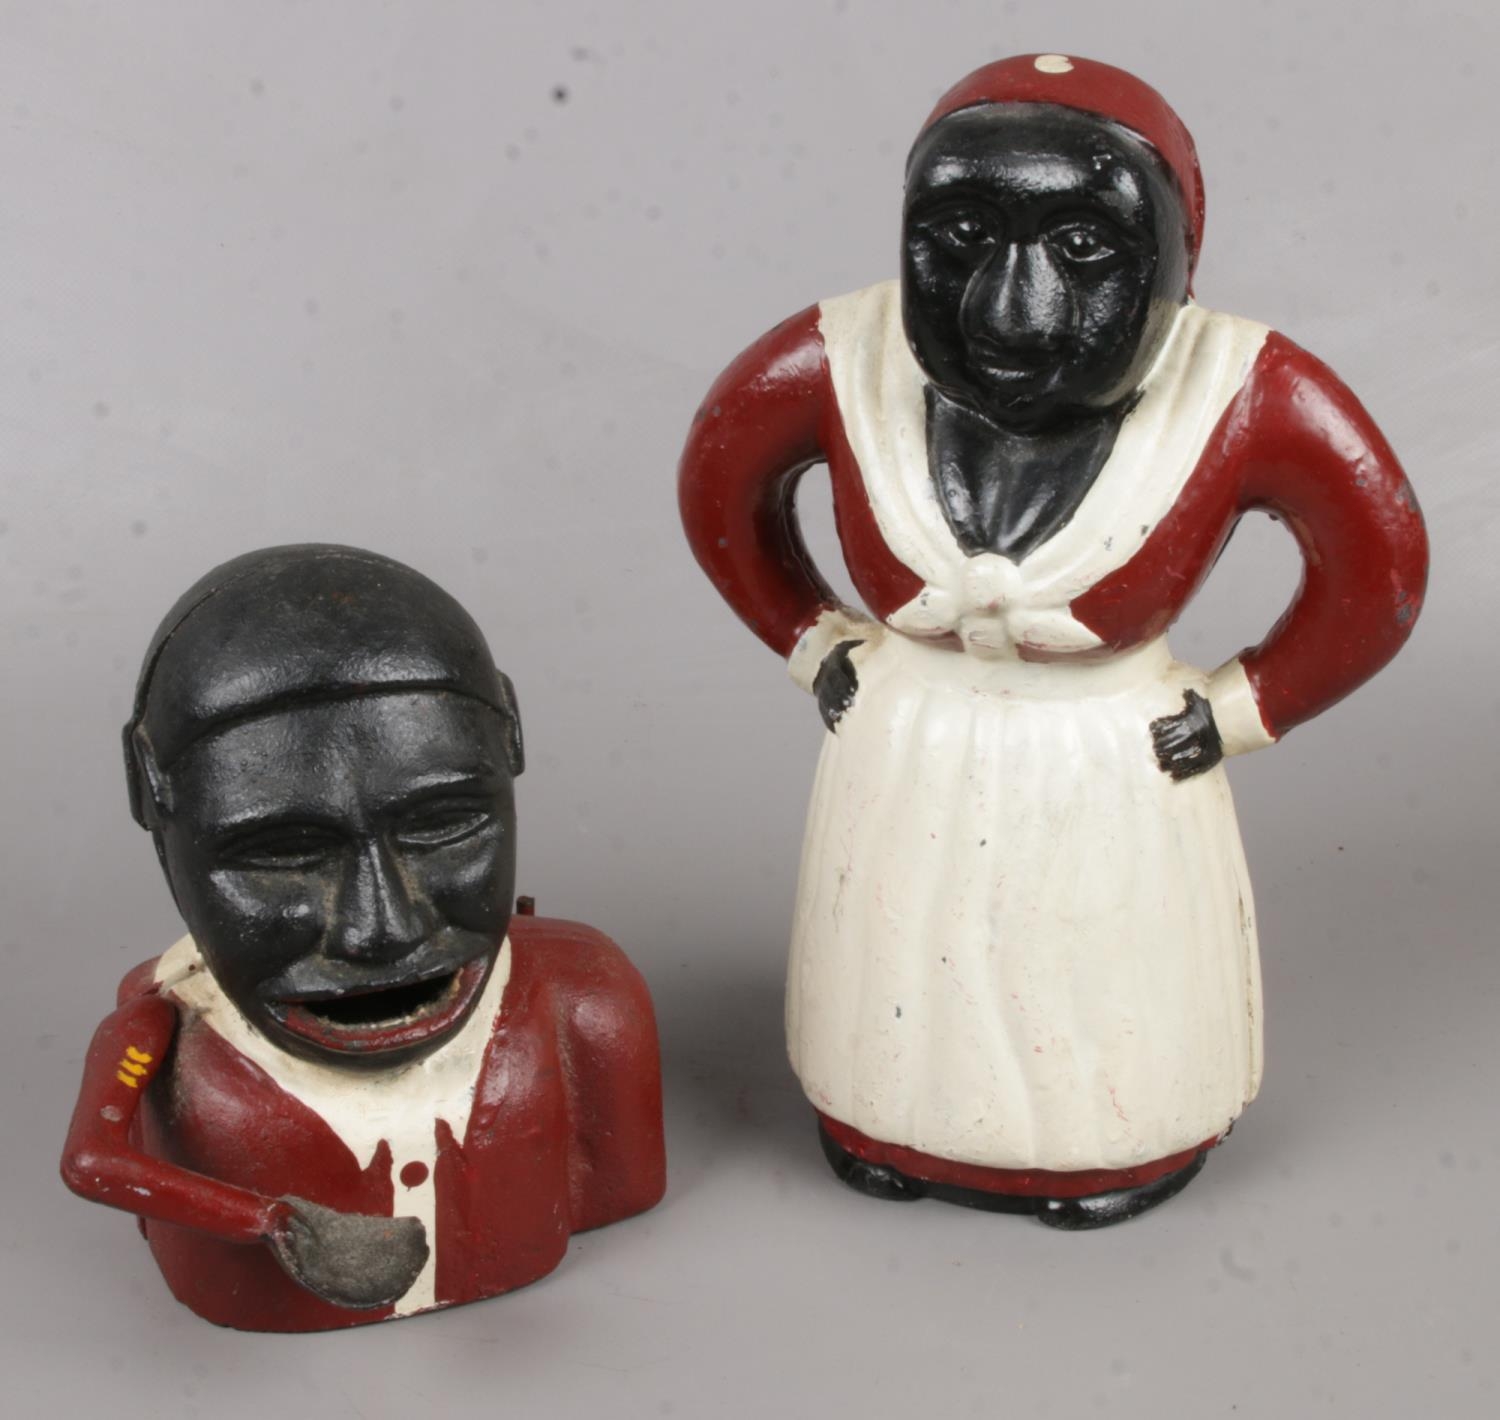 Two Novelty Cast Iron Money Boxes, depicting Black Figures, one with Moving Arm.